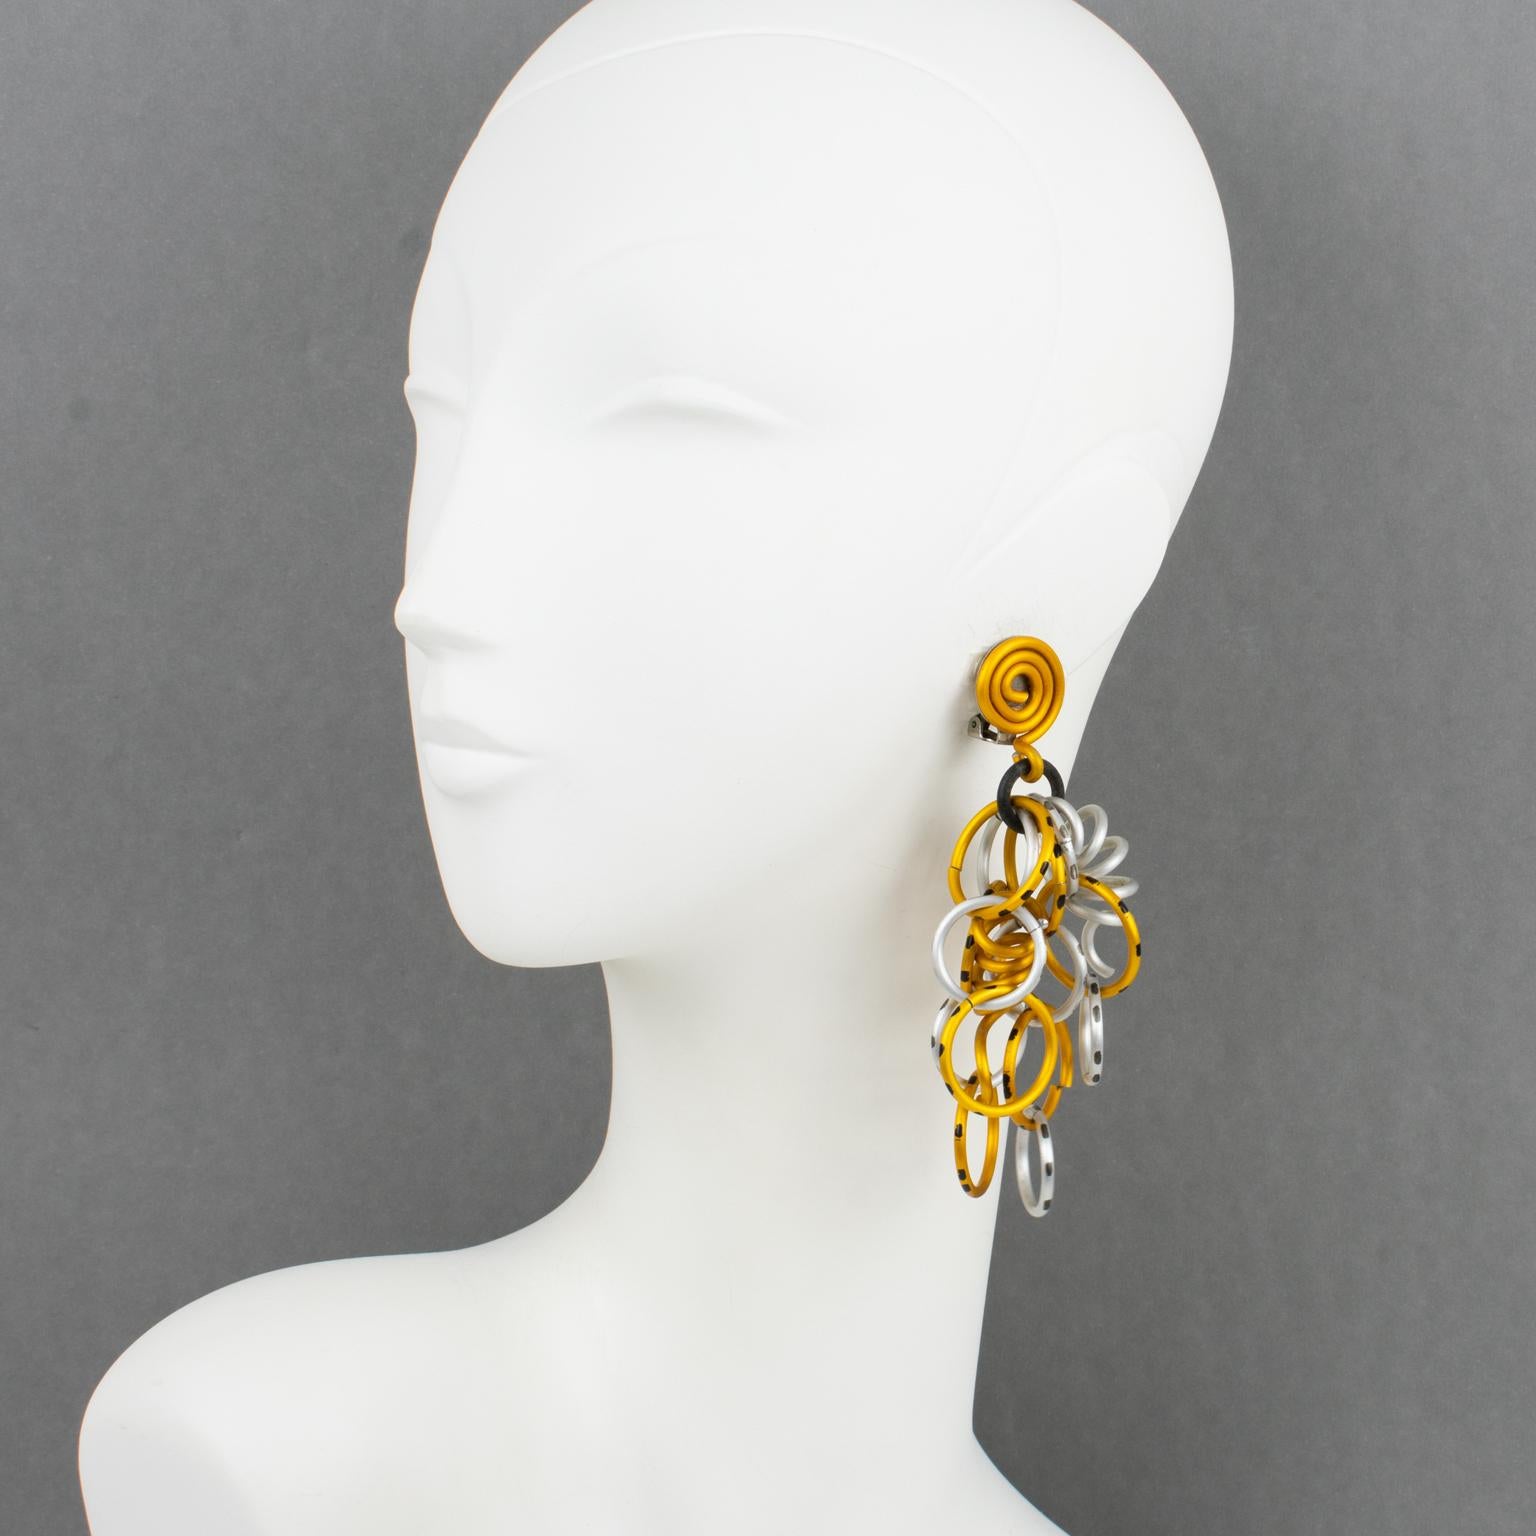 These spectacular David Spada, New York signed dangling clip-on earrings feature a trendy Space Age 1980s design with dangle articulated spirally coiled elements and assorted size rings. They are made of anodized aluminum metal with gold and silver